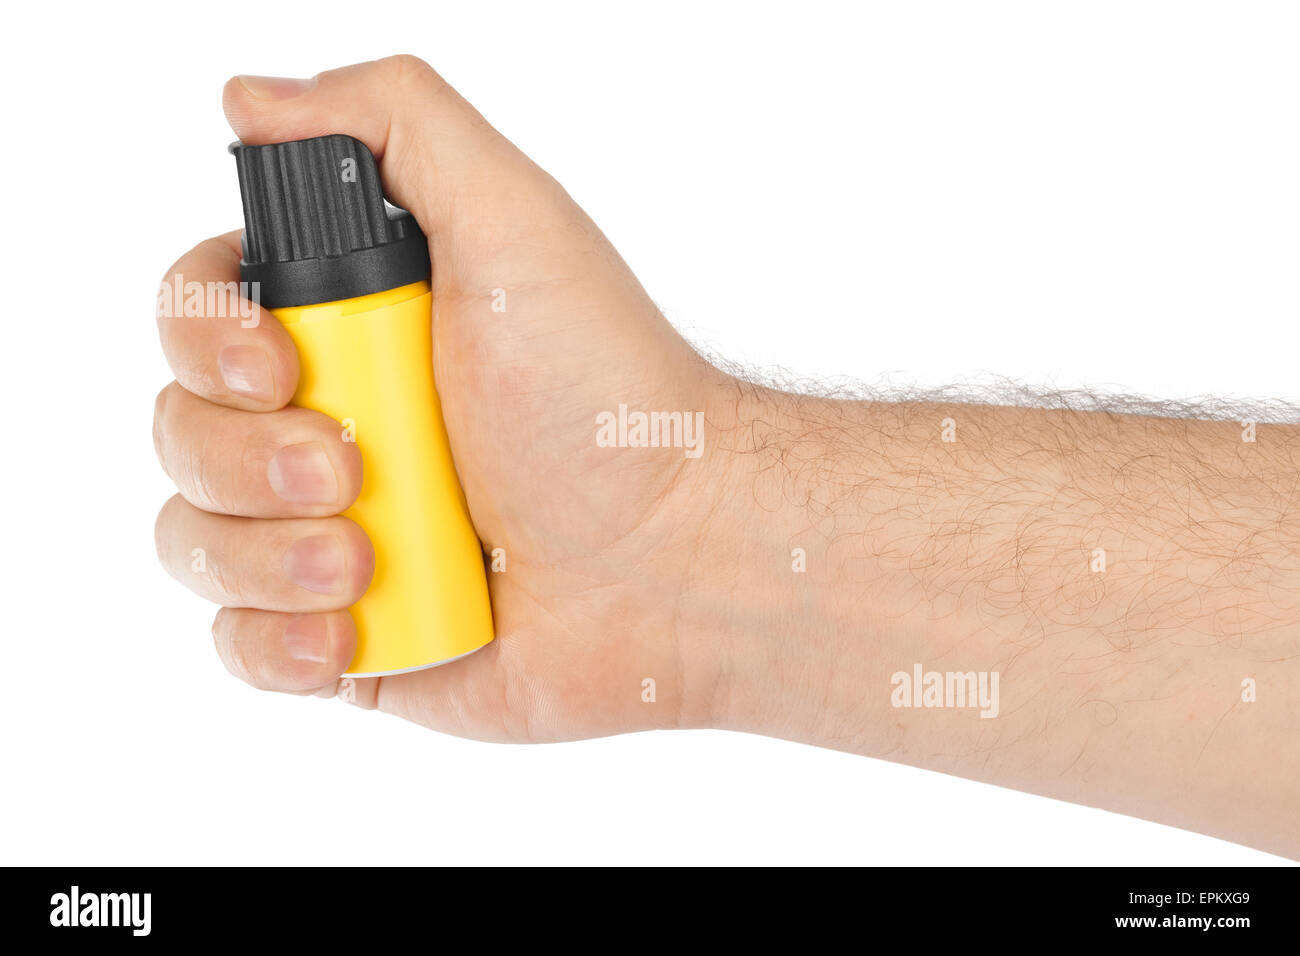 Hand with bottle of pepper spray Stock Photo